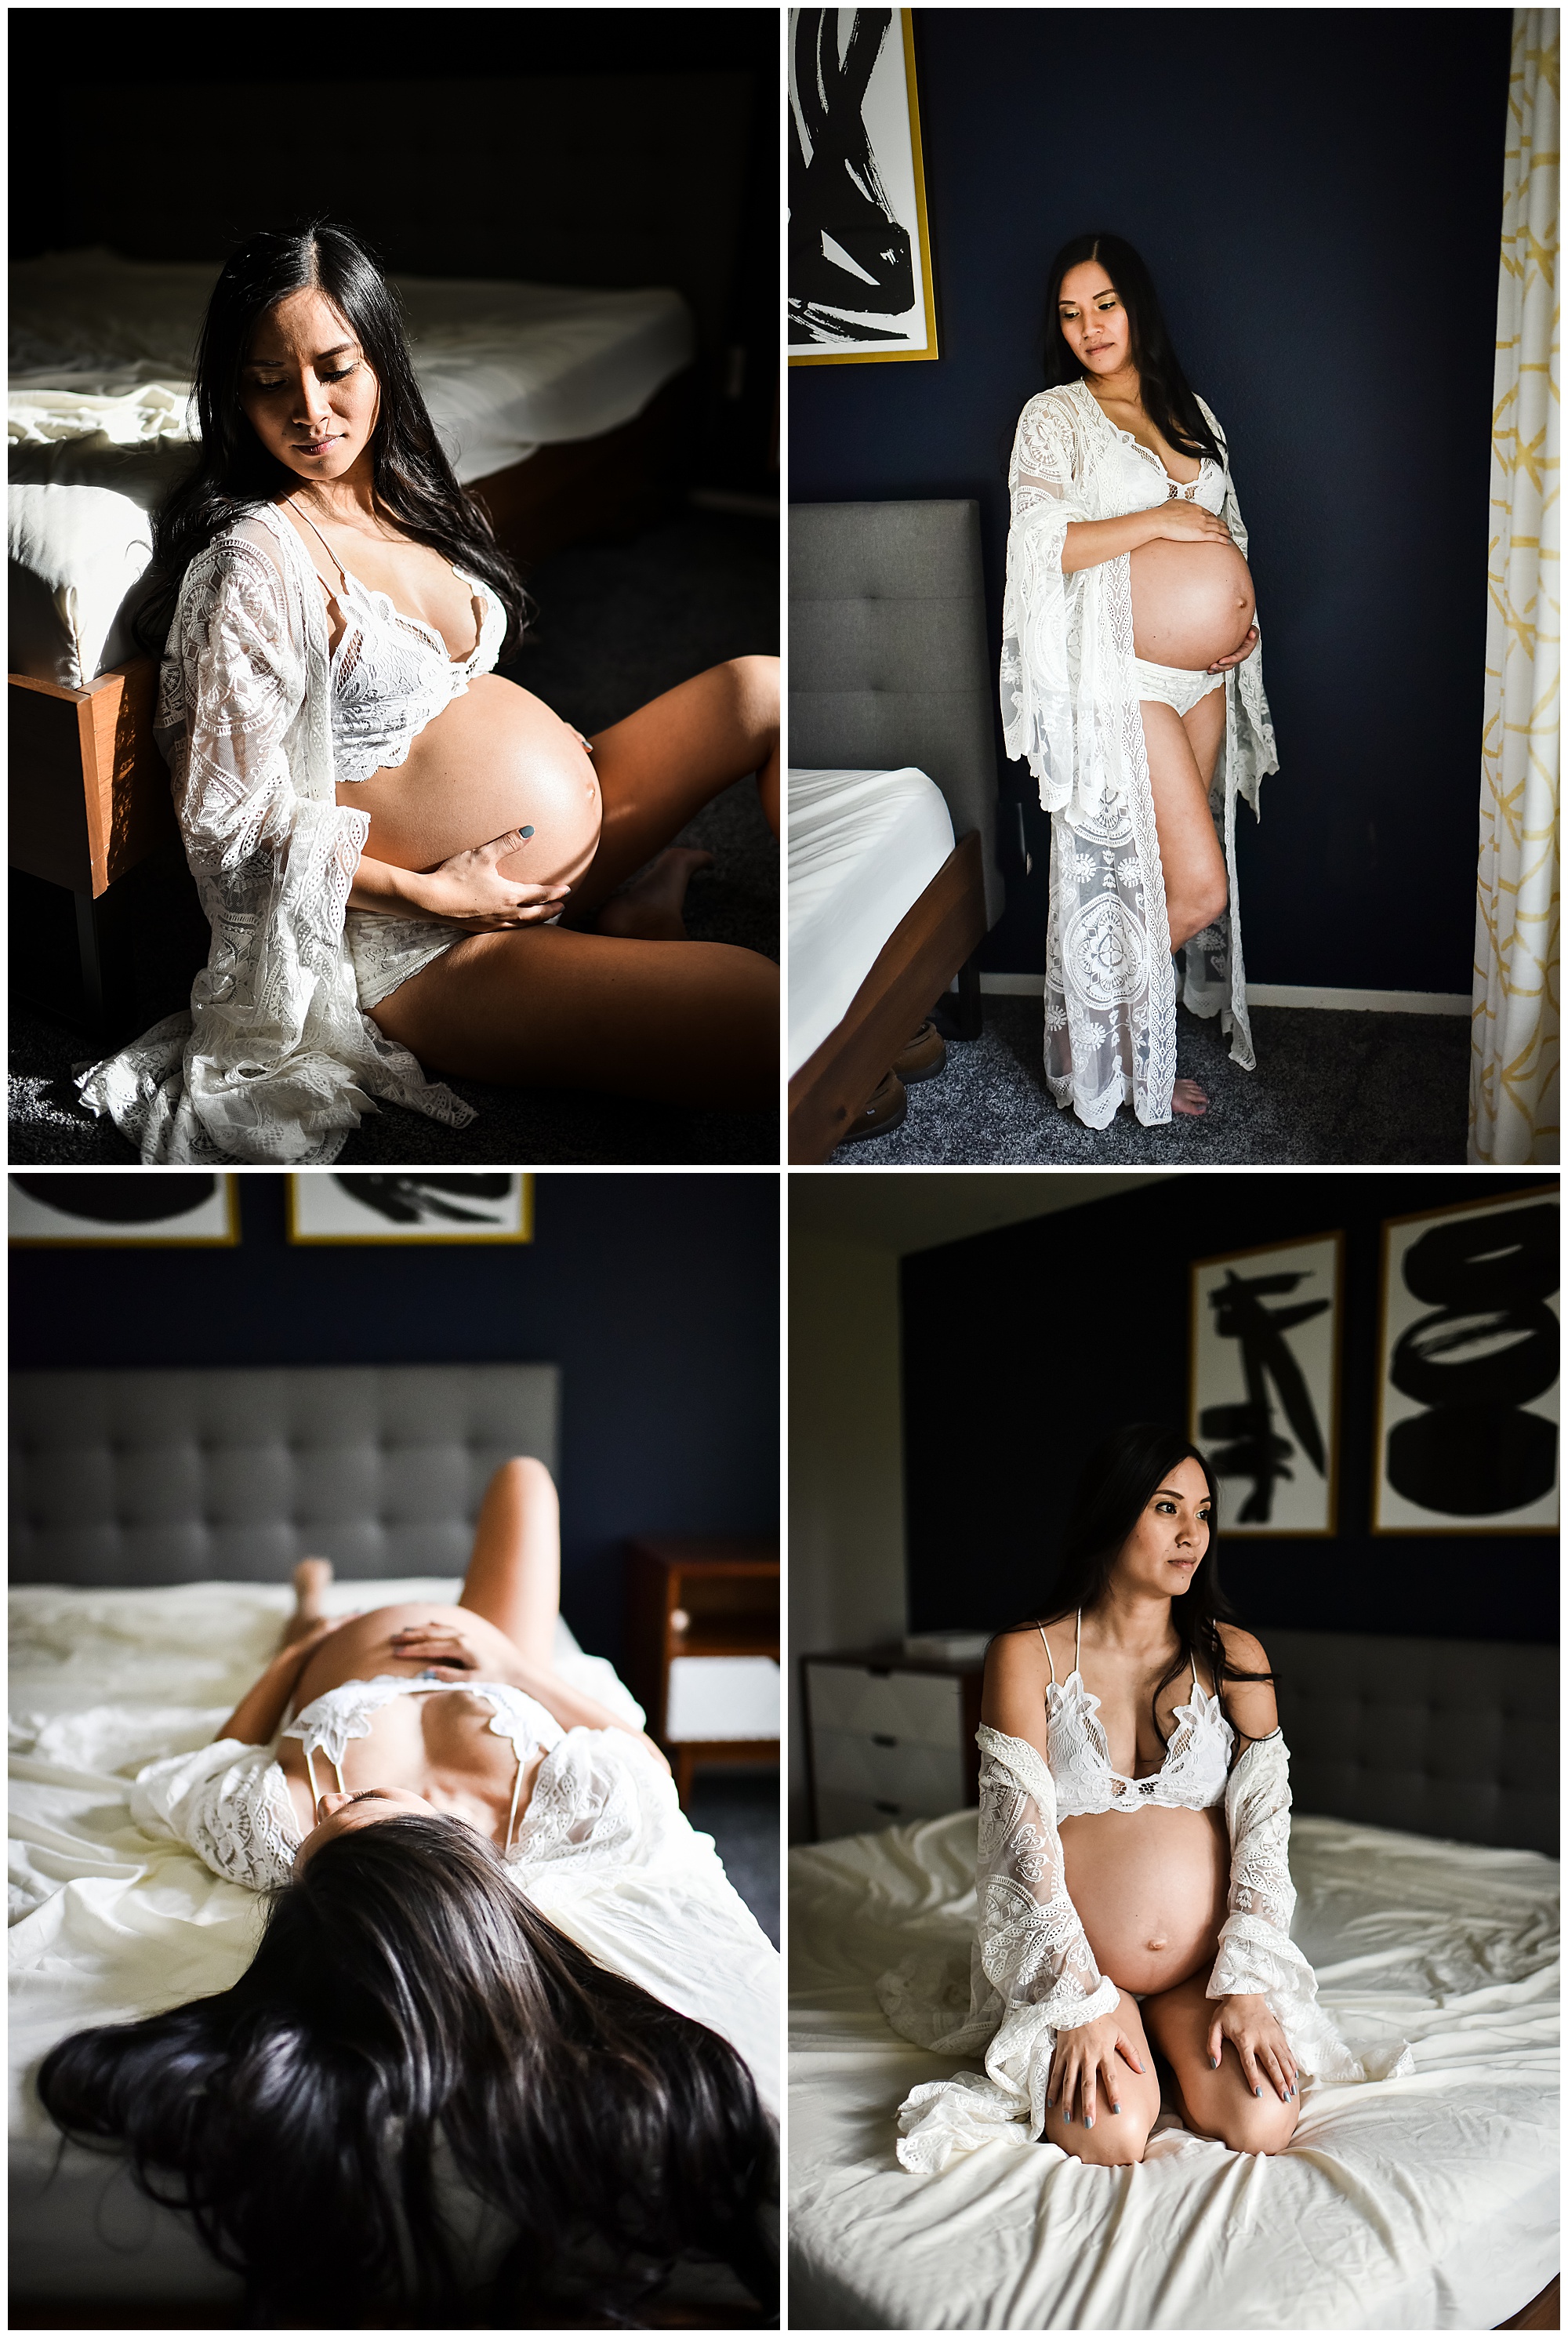 In home Lifestyle Maternity Boudoir Photoshoot pregnant woman in lace robe Emily Ann Photography Seattle Photographer.